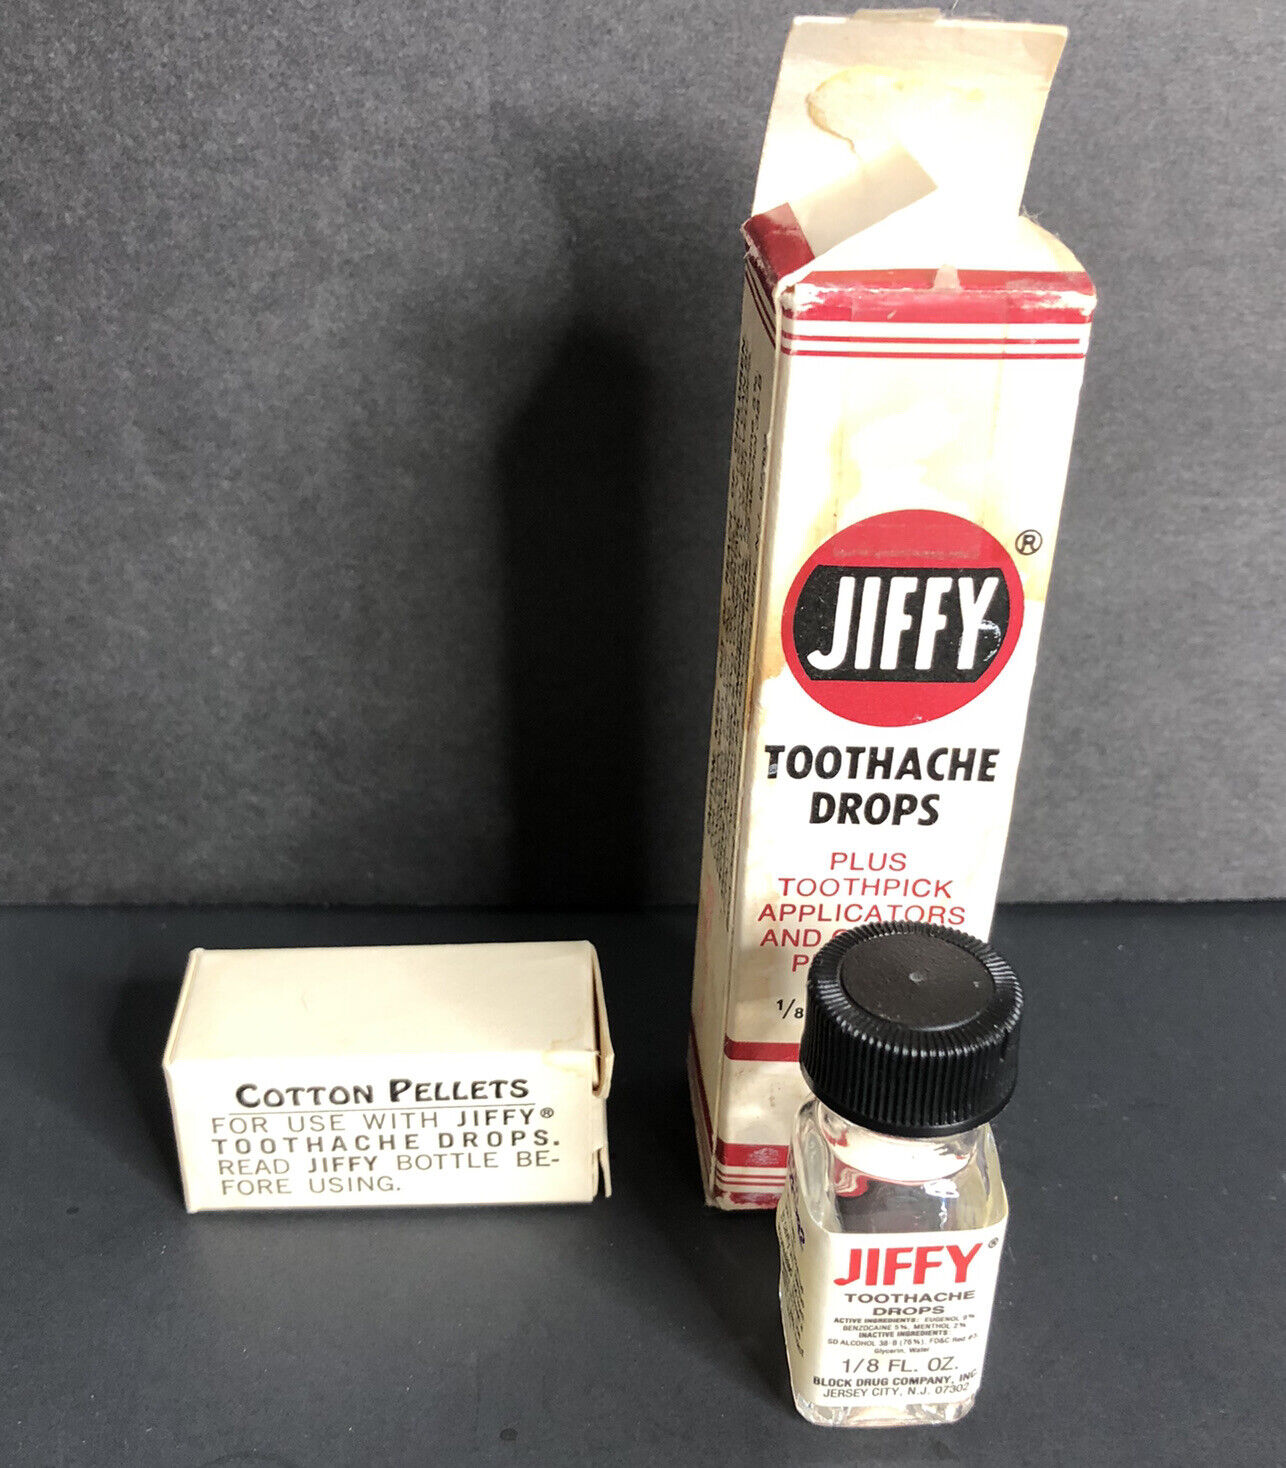 Vintage Jiffy Toothache Drops Medicine Bottle with Box and Cotton Pellets EMPTY